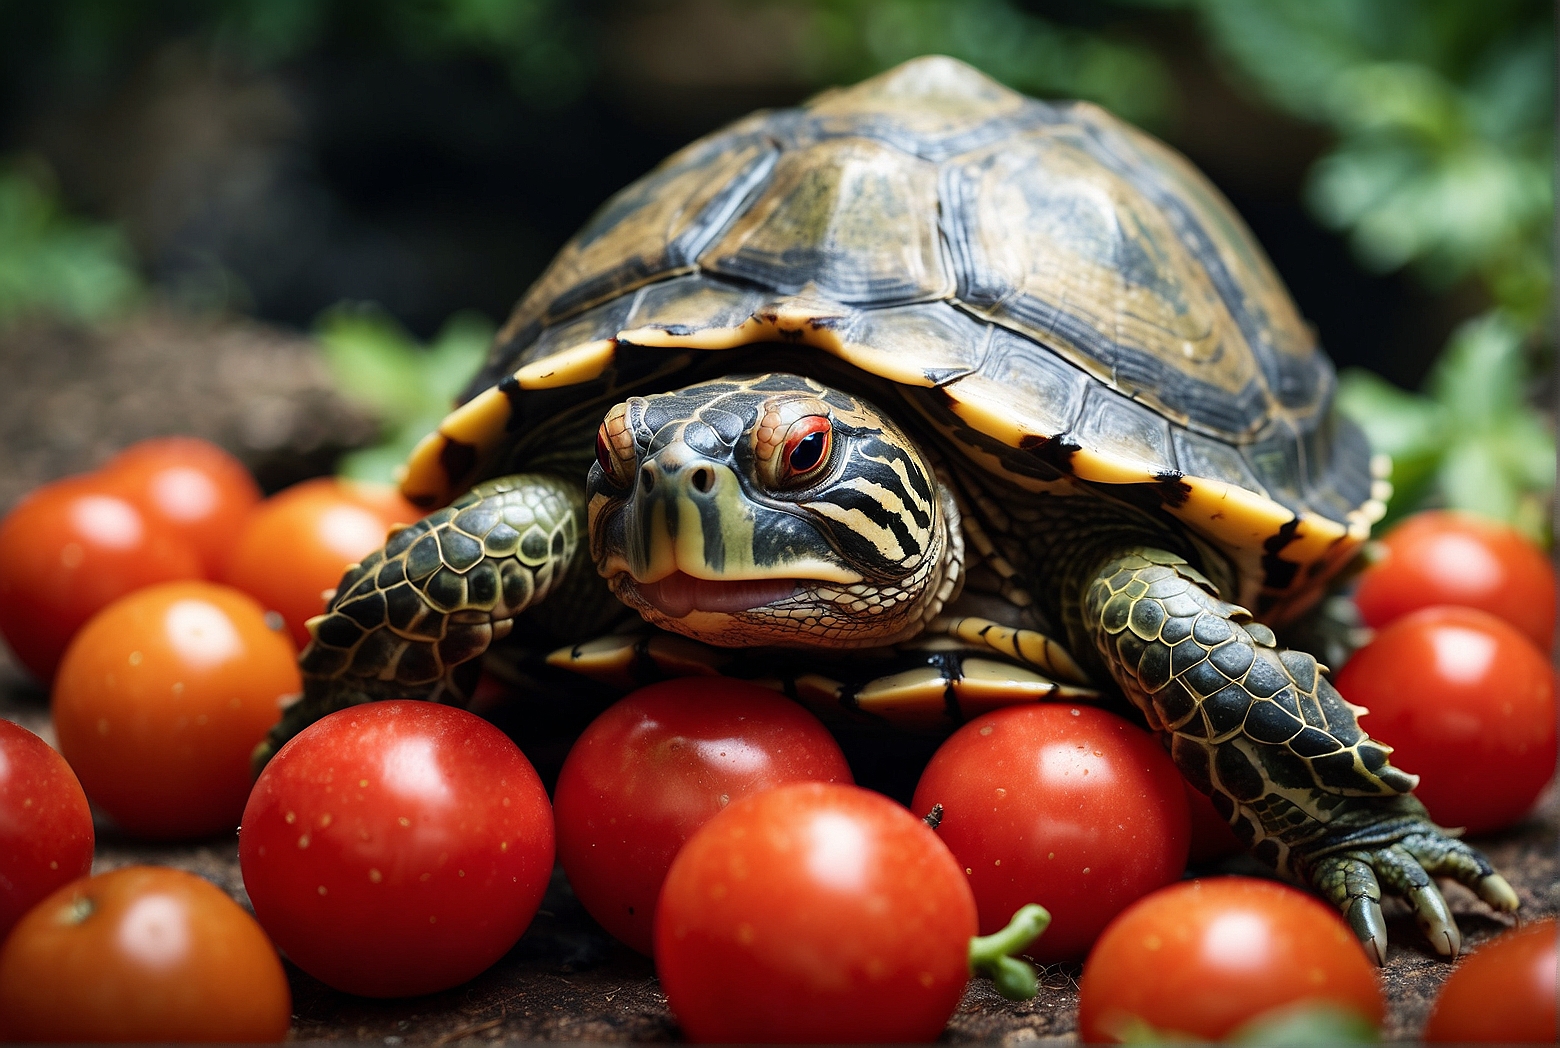 Can red-eared slider turtles eat tomatoes?